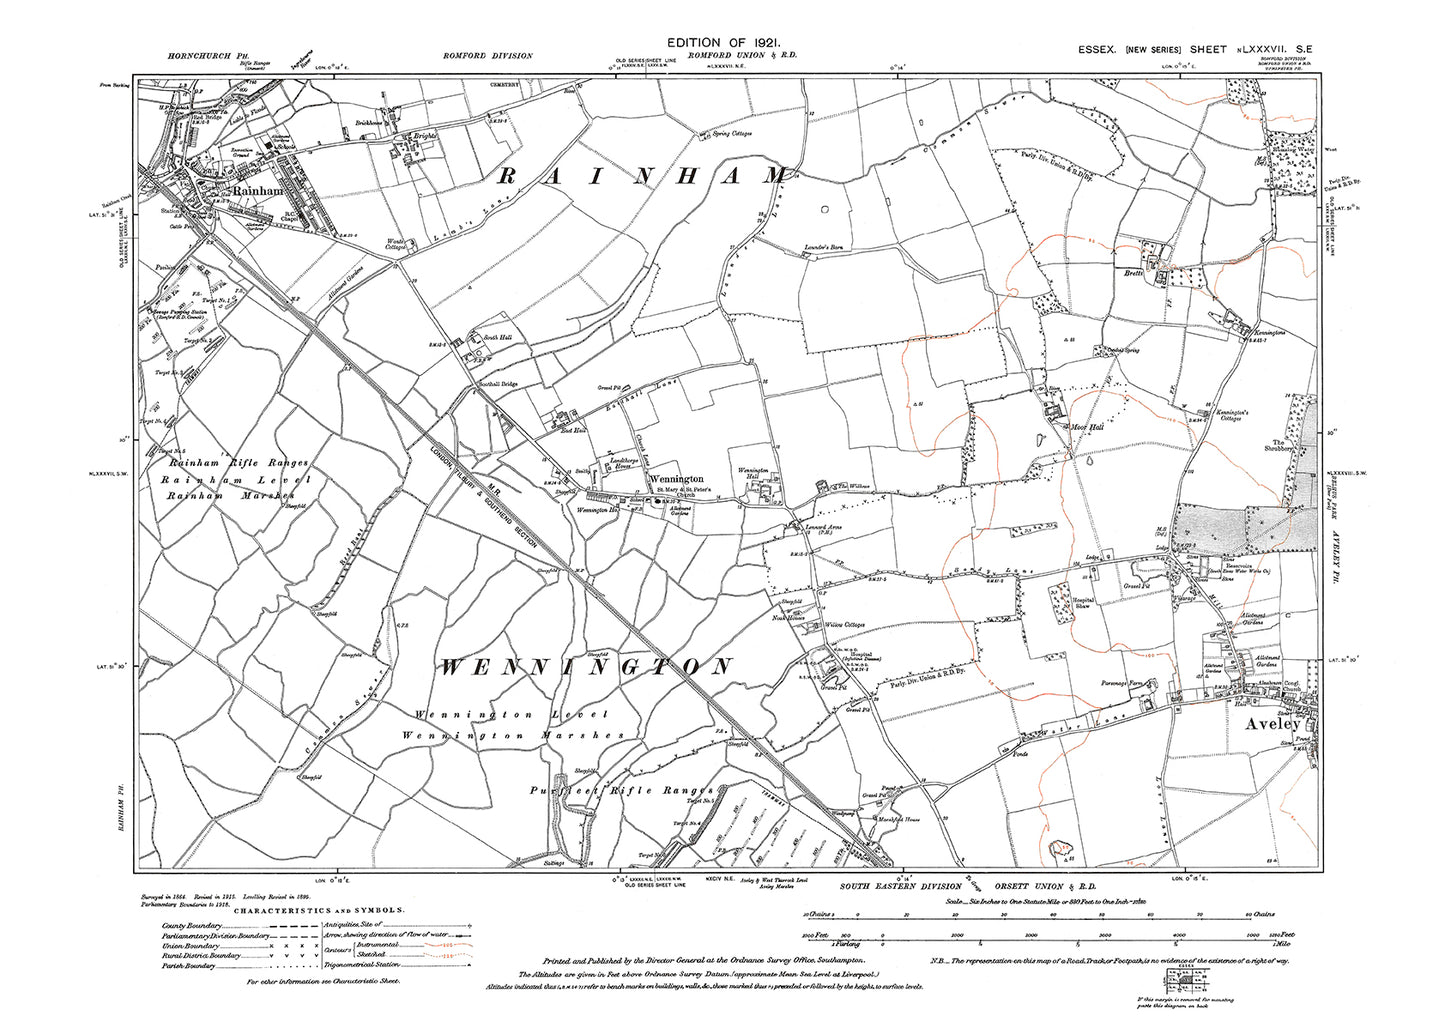 Old OS map dated 1921, showing Rainham, Wennington and Aveley (west) in Essex - 87SE